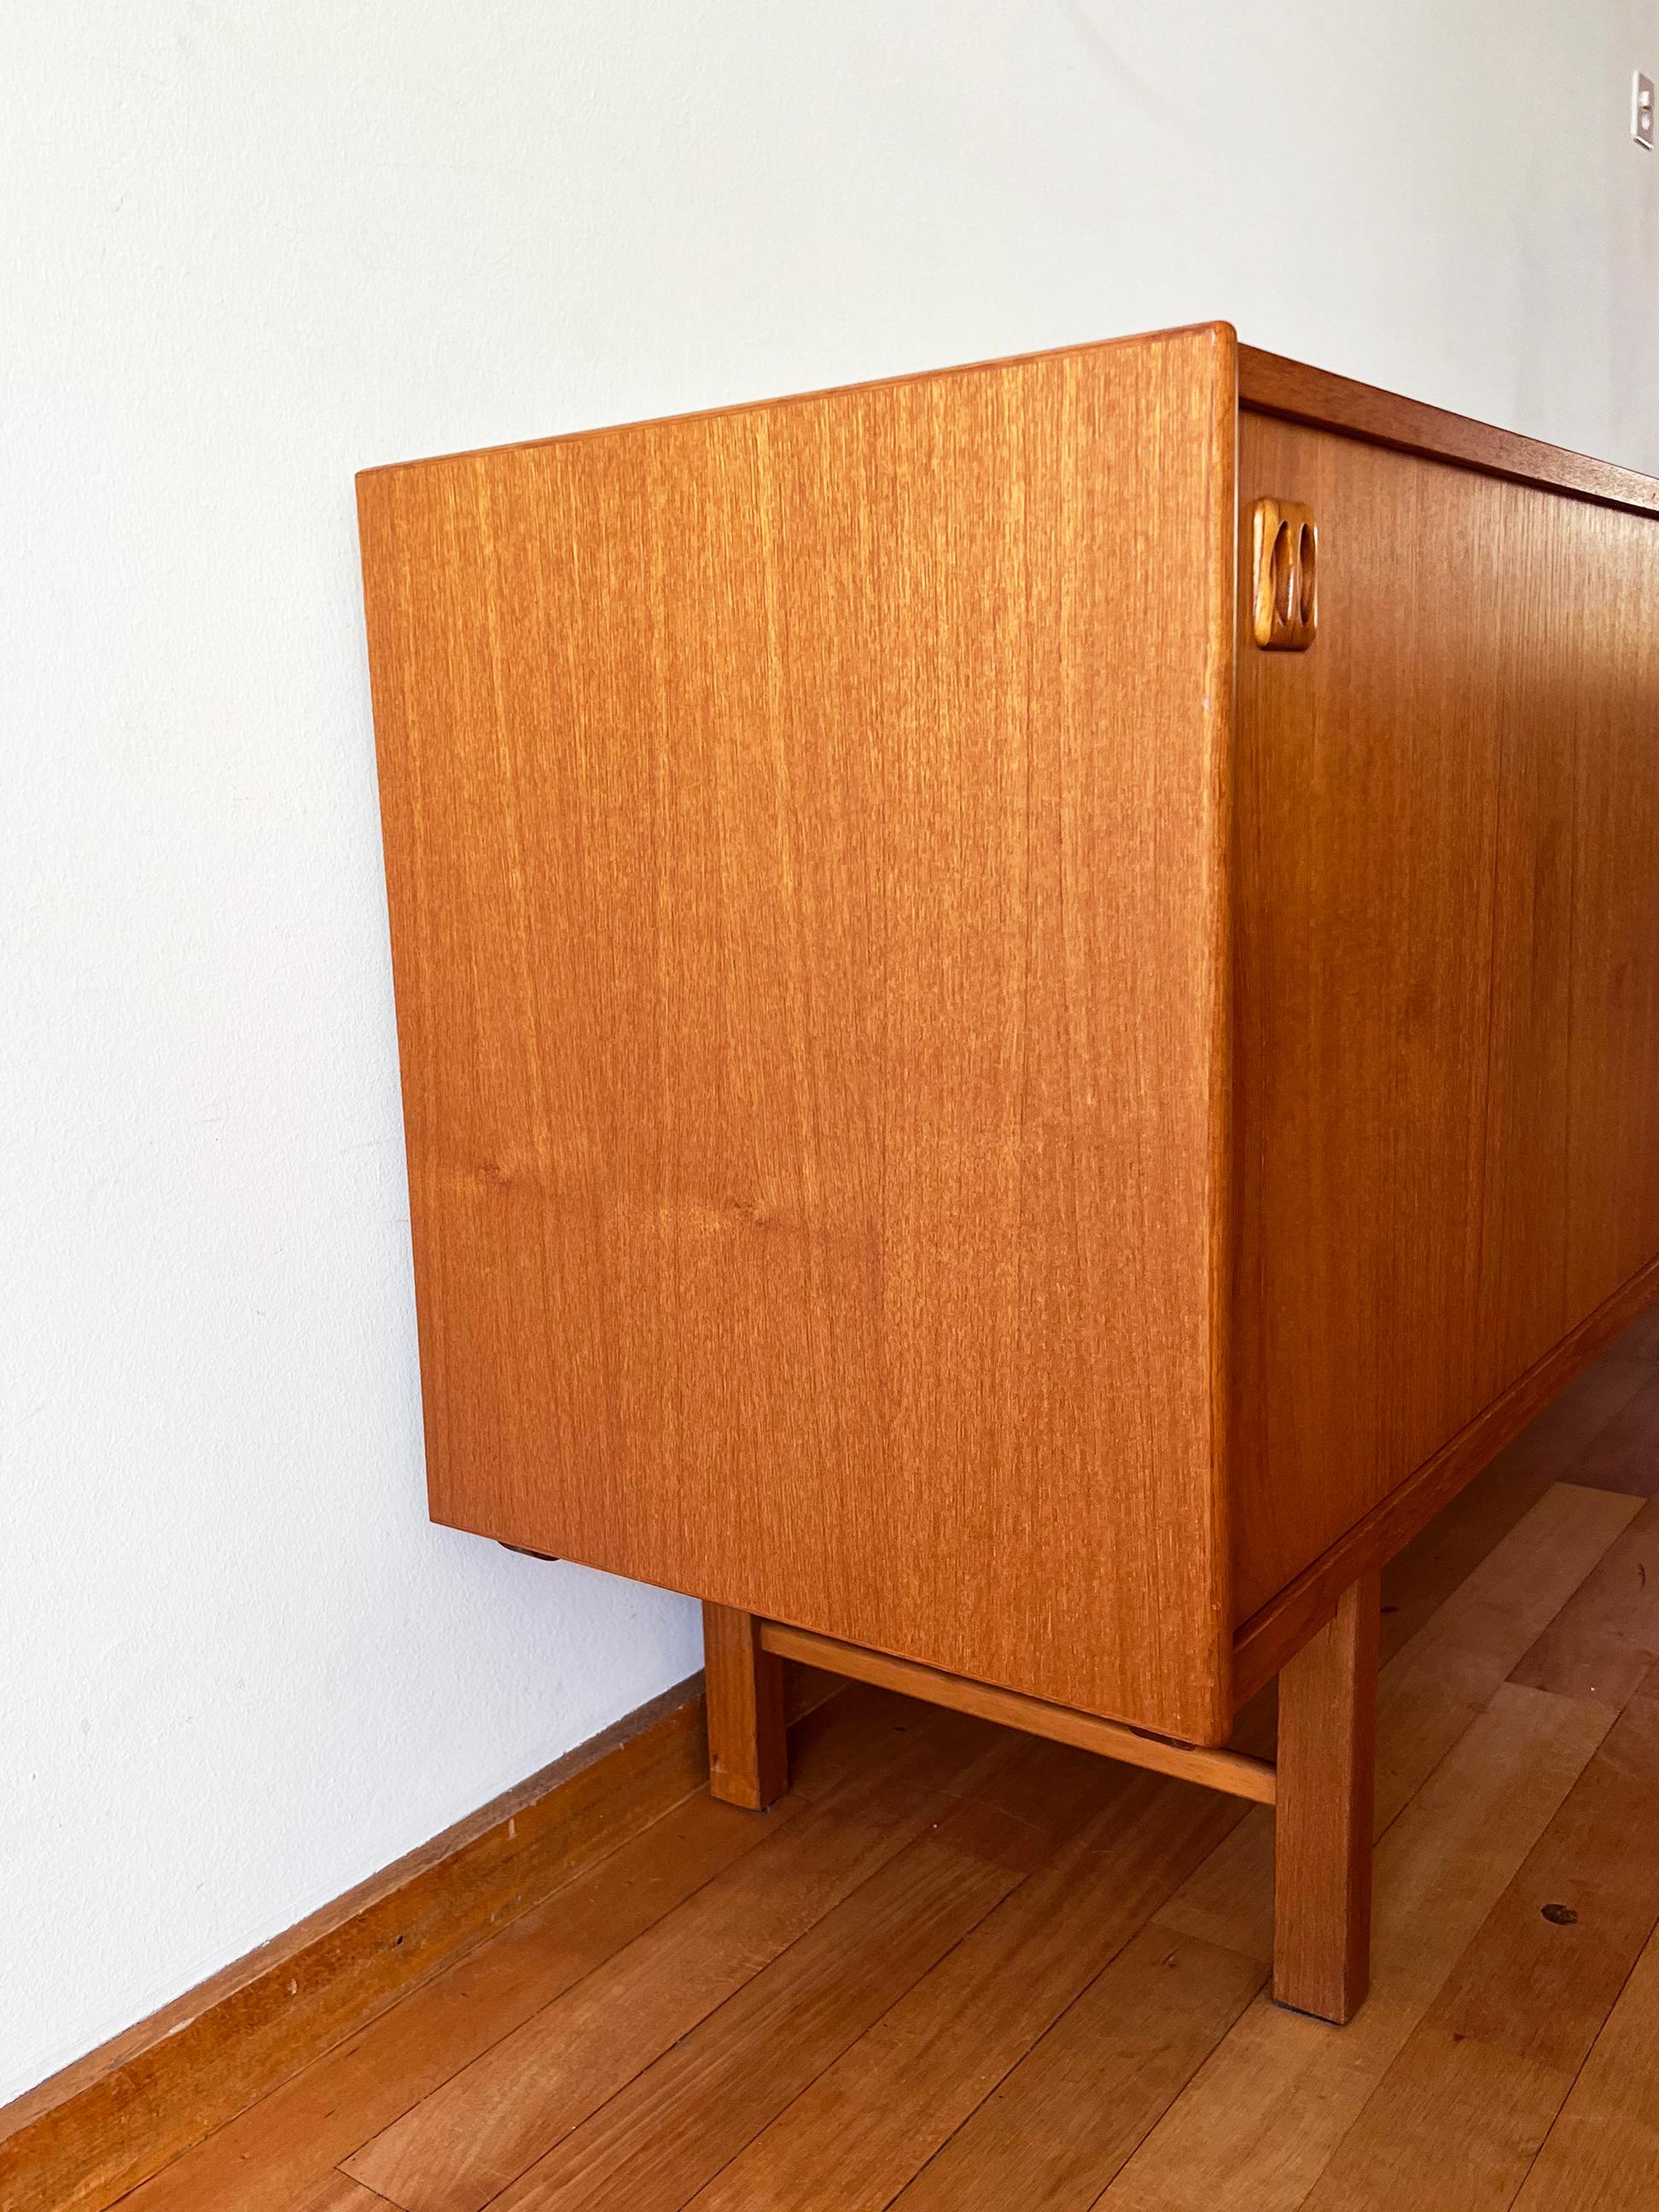 Mid-20th Century Mid Century Danish Teak Credenza with Shelving and Storage Drawer Denmark Design For Sale